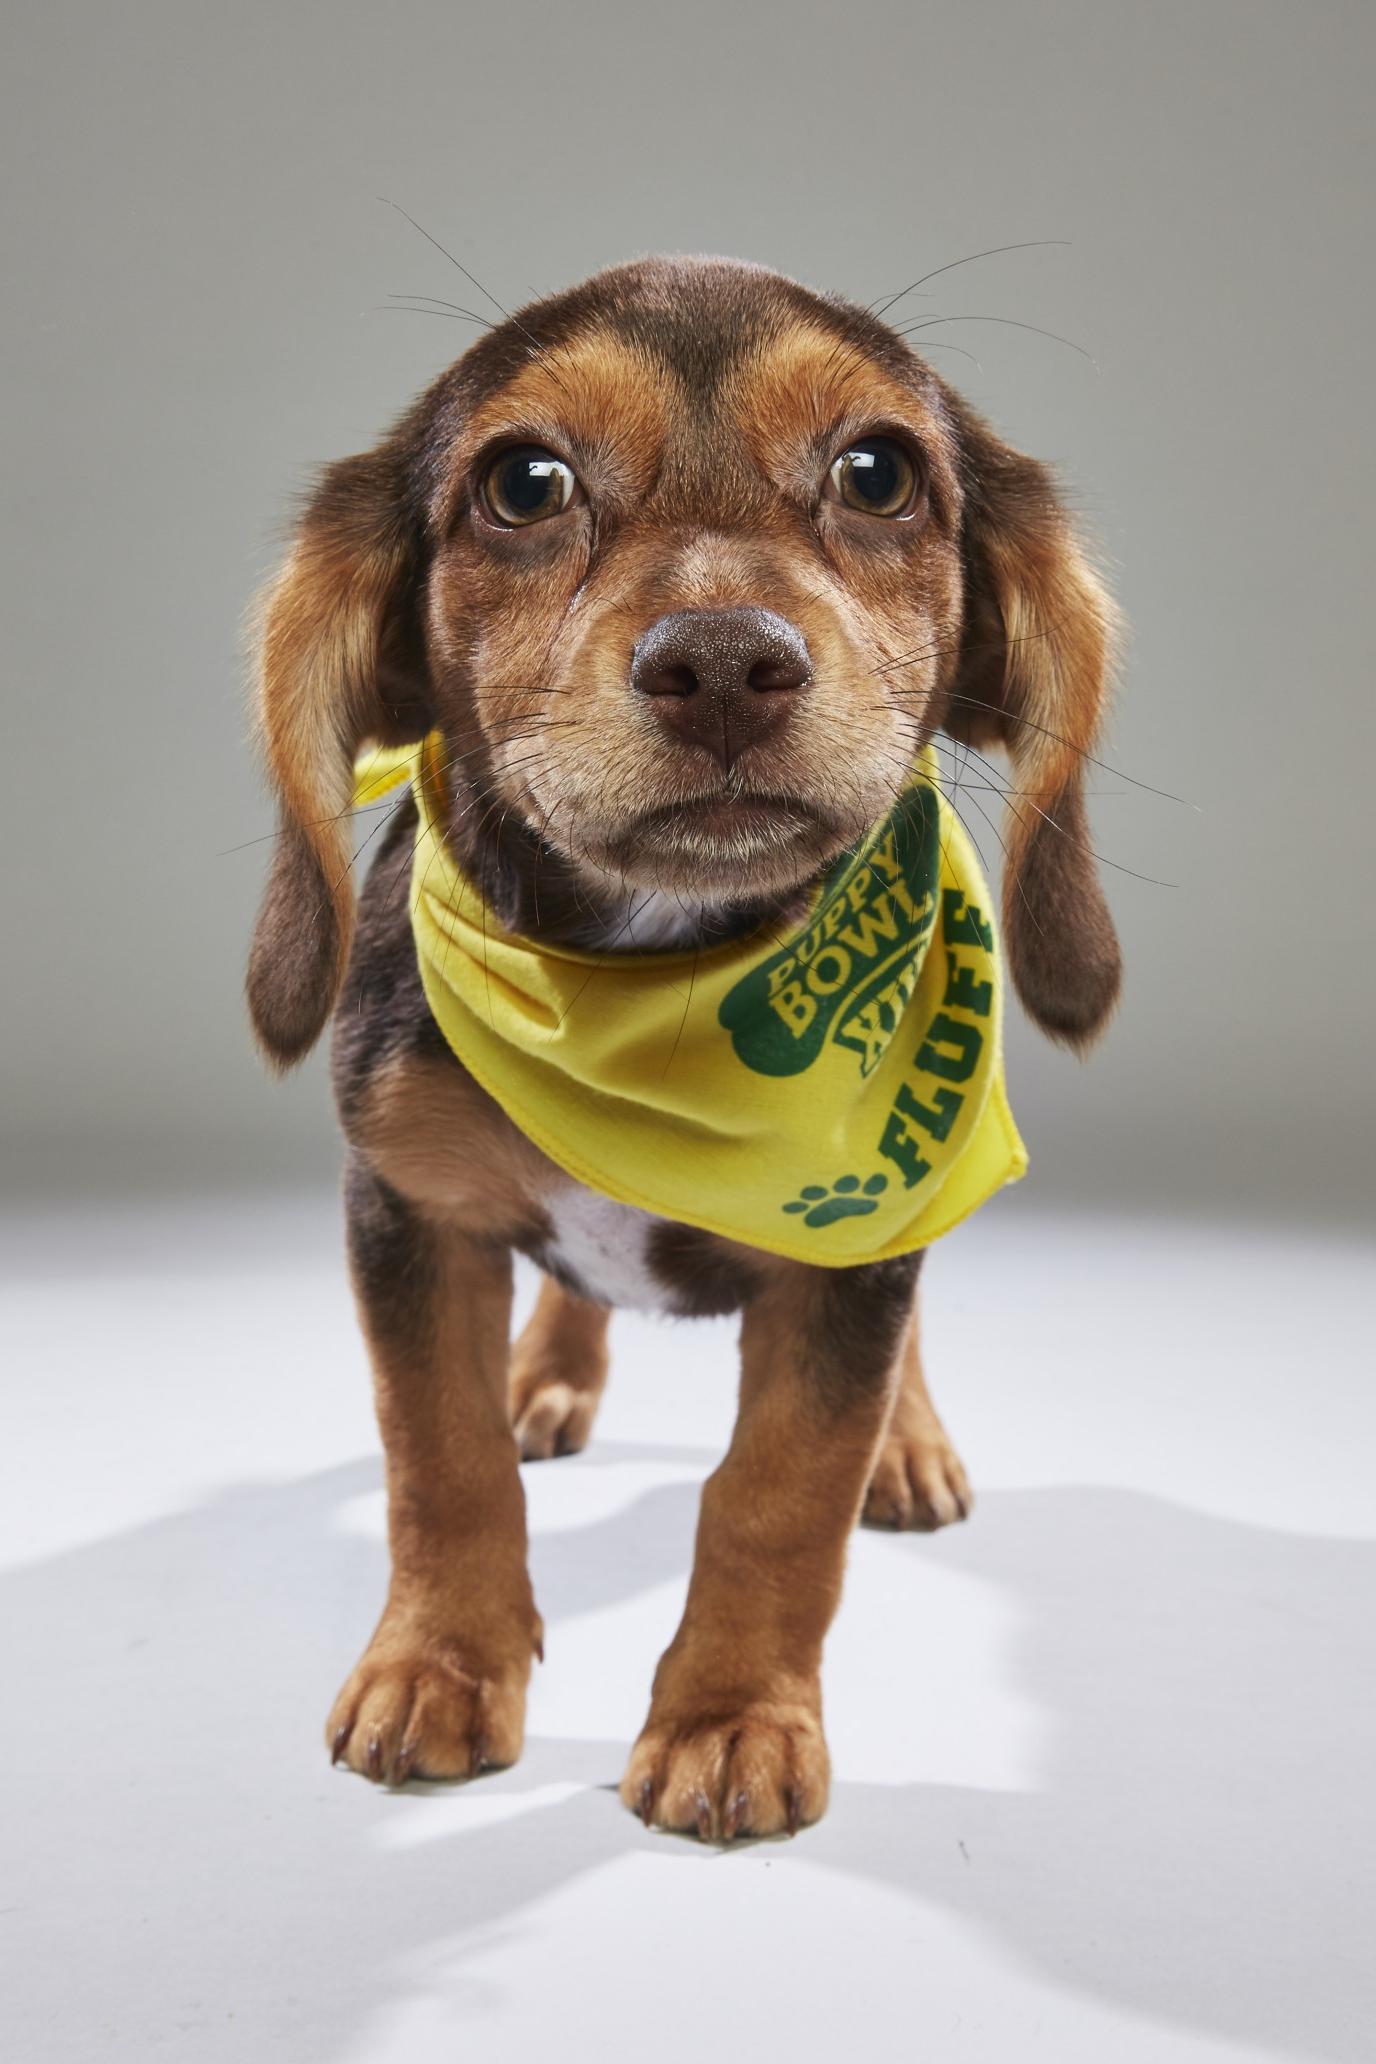 Puppy Dragonfly will be playing for Team Fluff (Animal Planet)